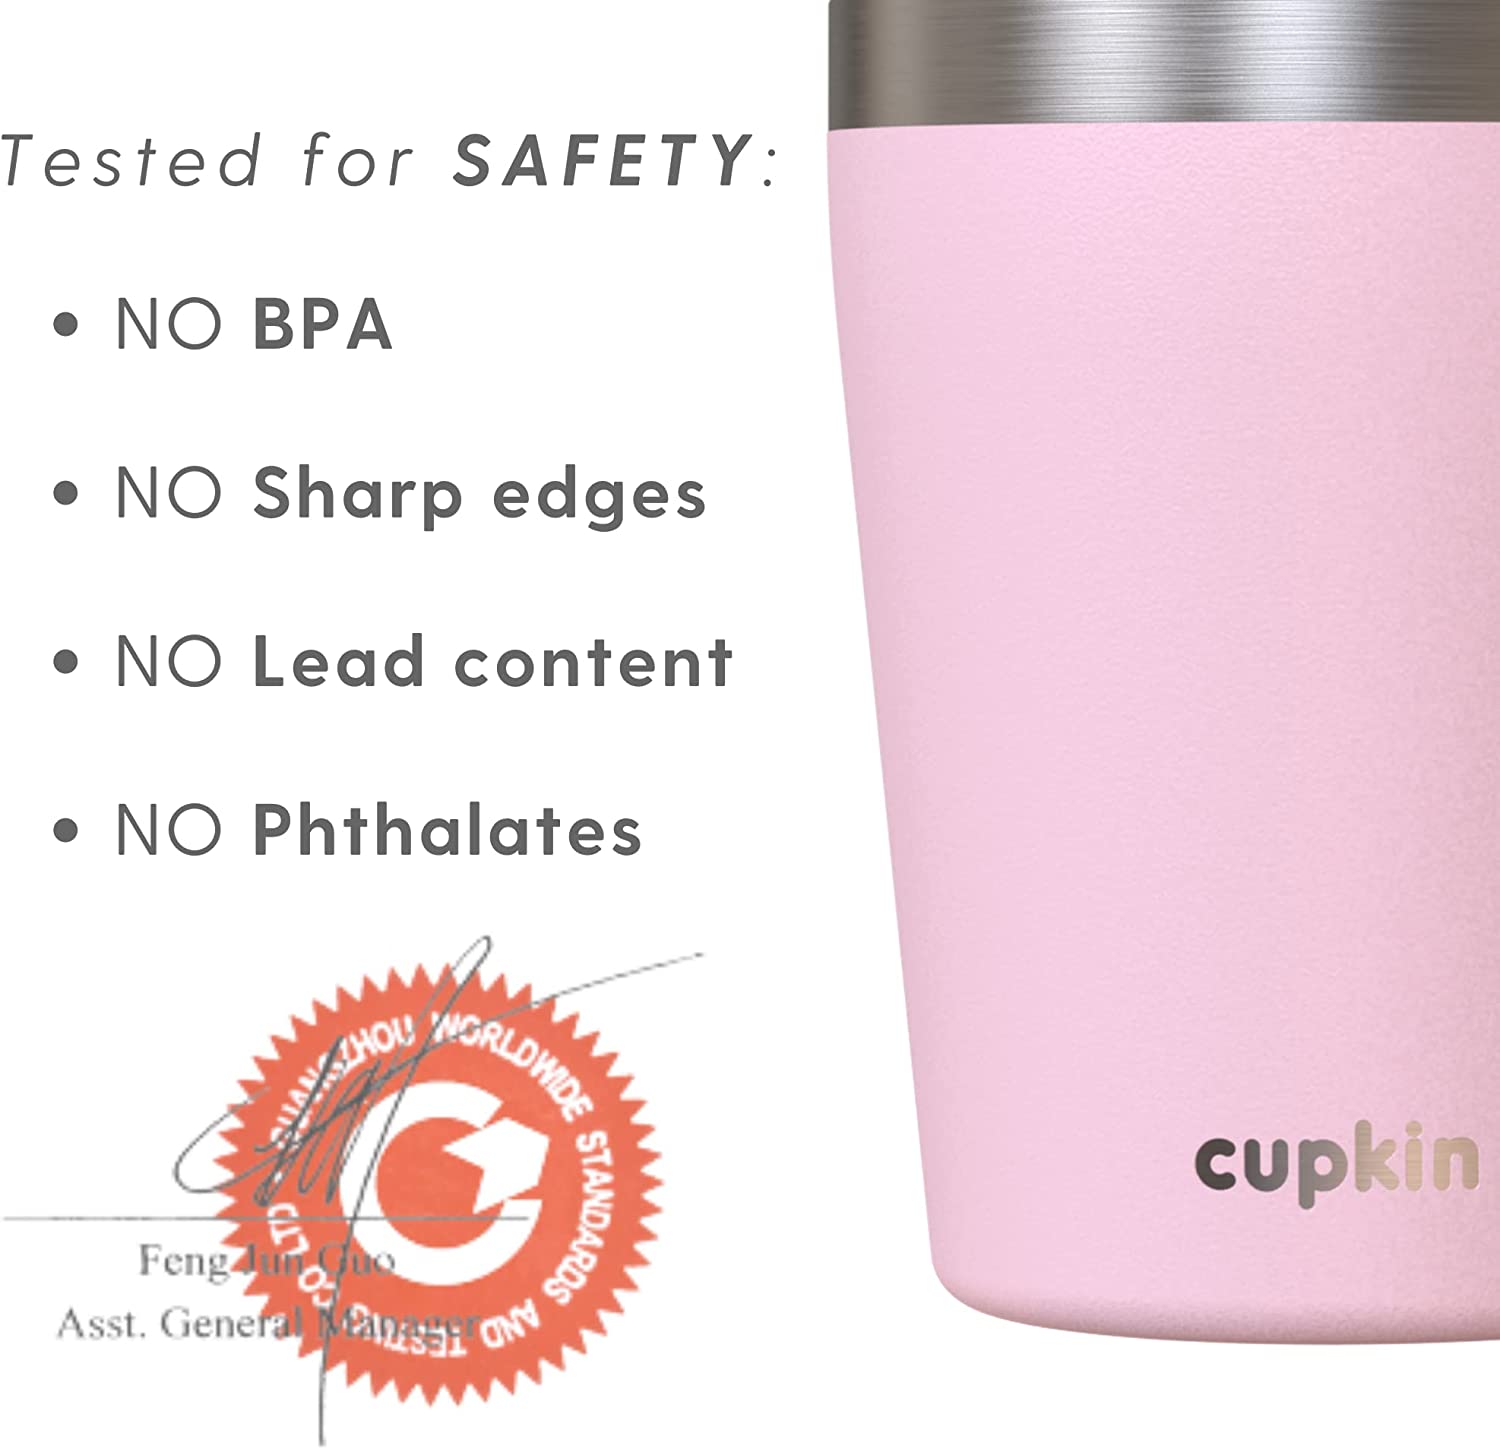 CUPKIN Children's Cup Recall (2023) Over High Levels Of Lead